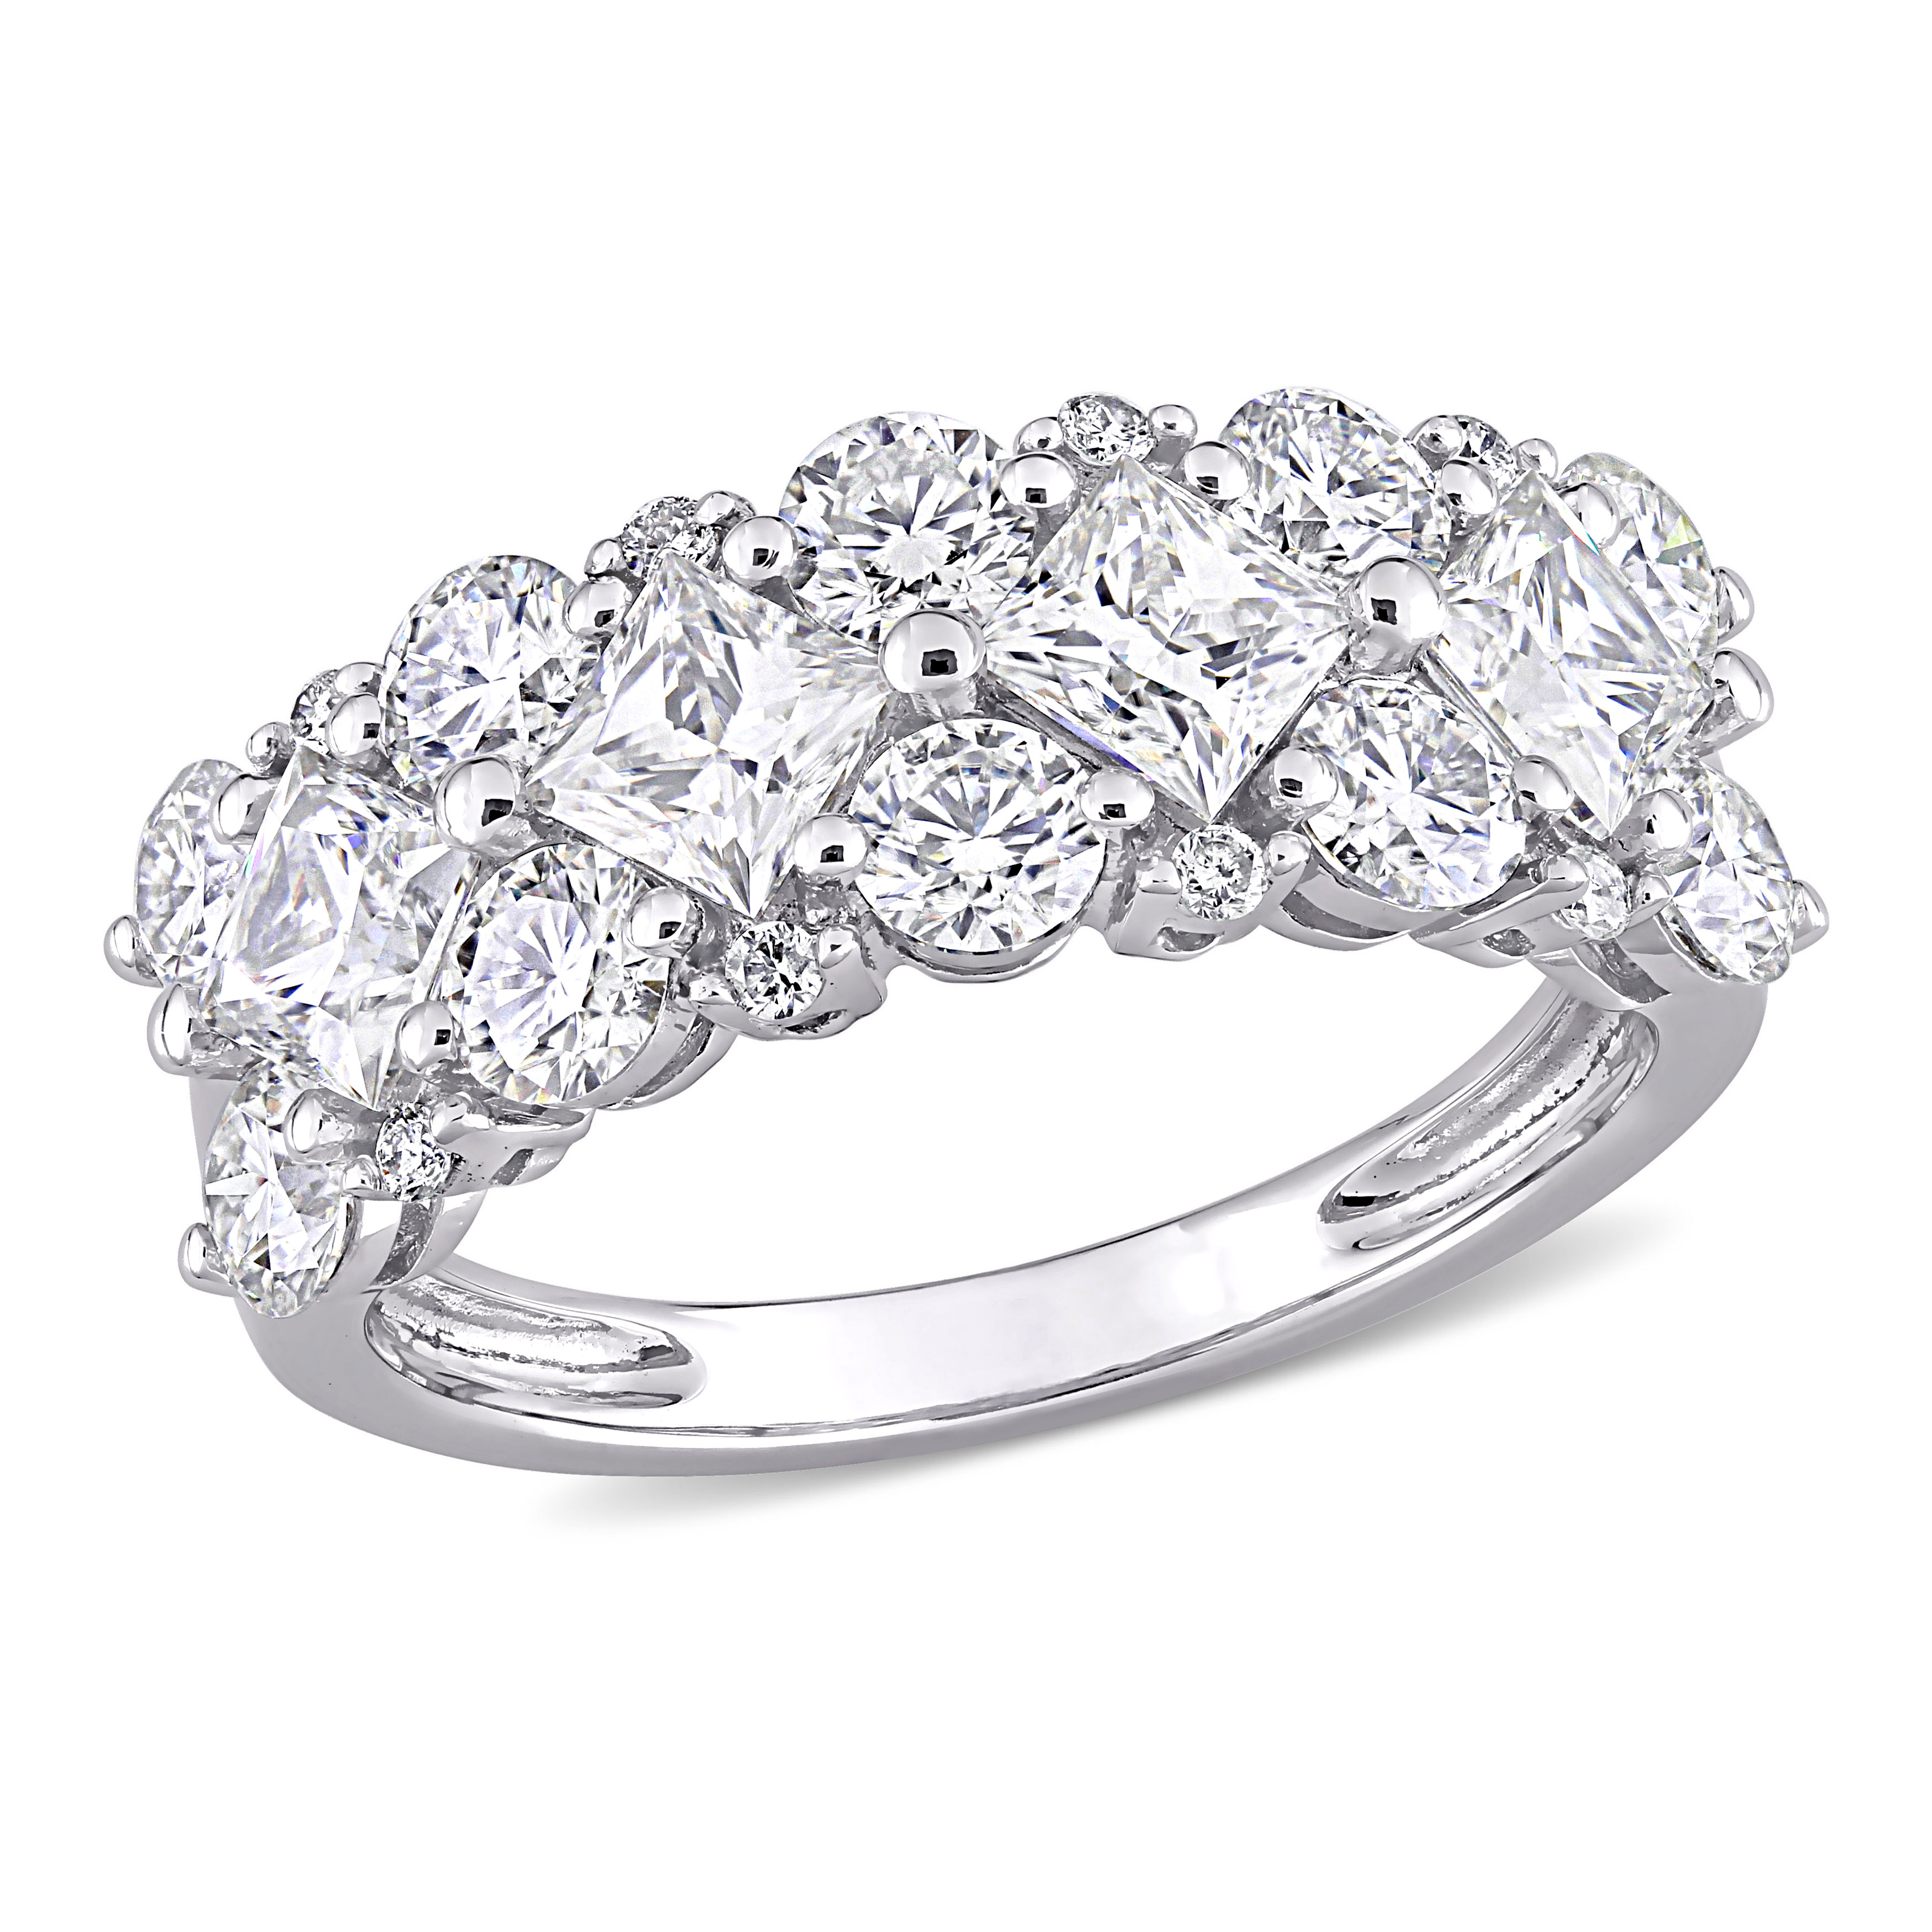 3 1/10 CT DEW Created Moissanite and 1/10 CT TW Diamond Cluster Ring in 10k White Gold